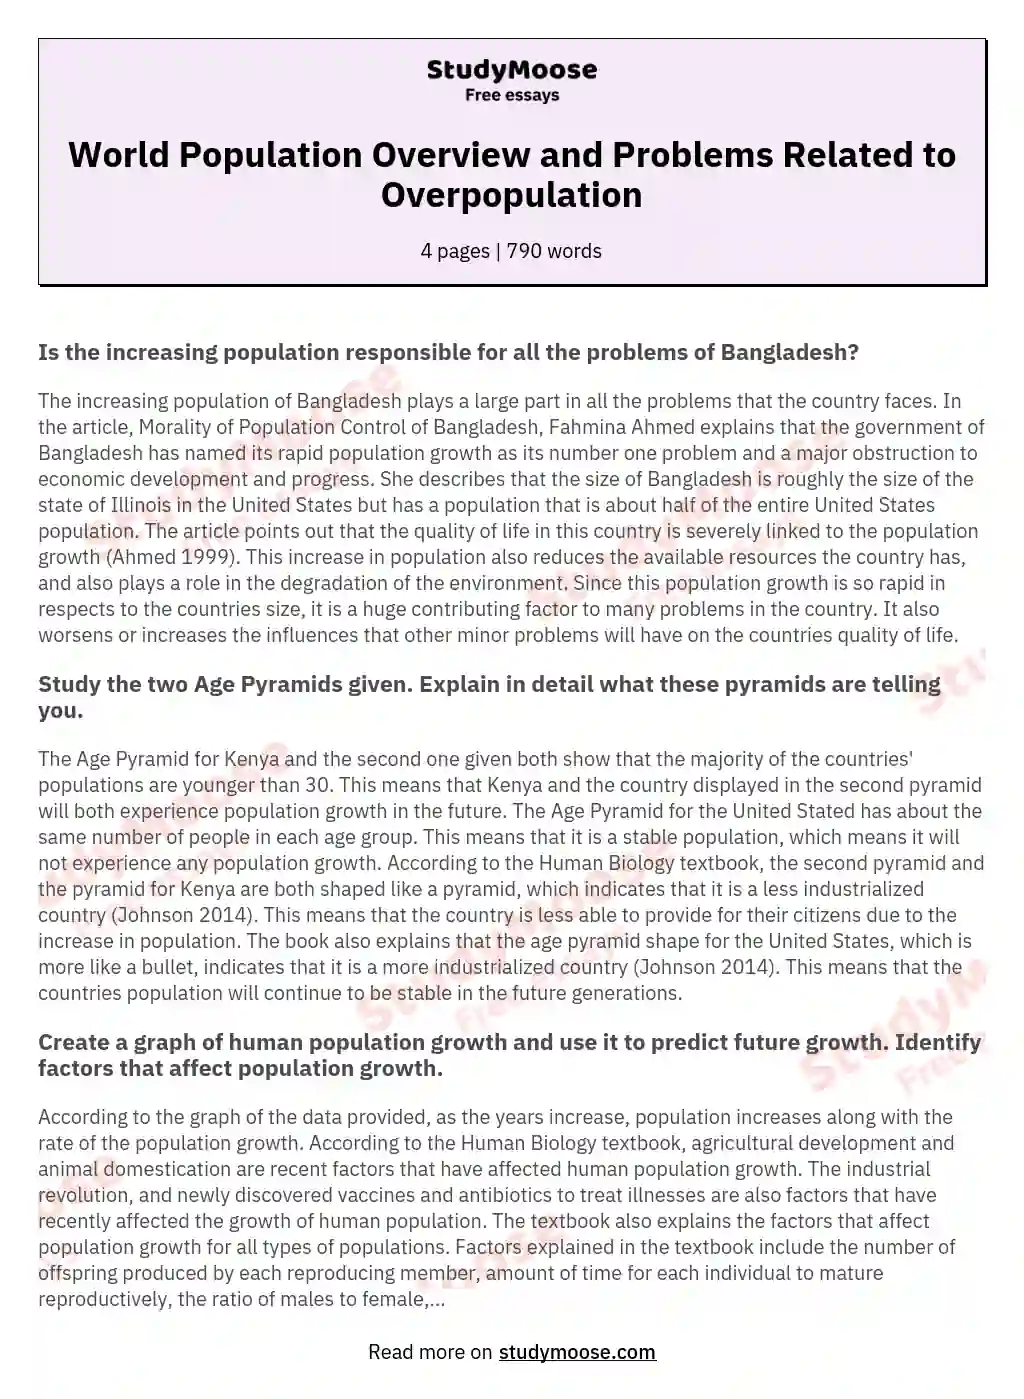 World Population Overview and Problems Related to Overpopulation essay